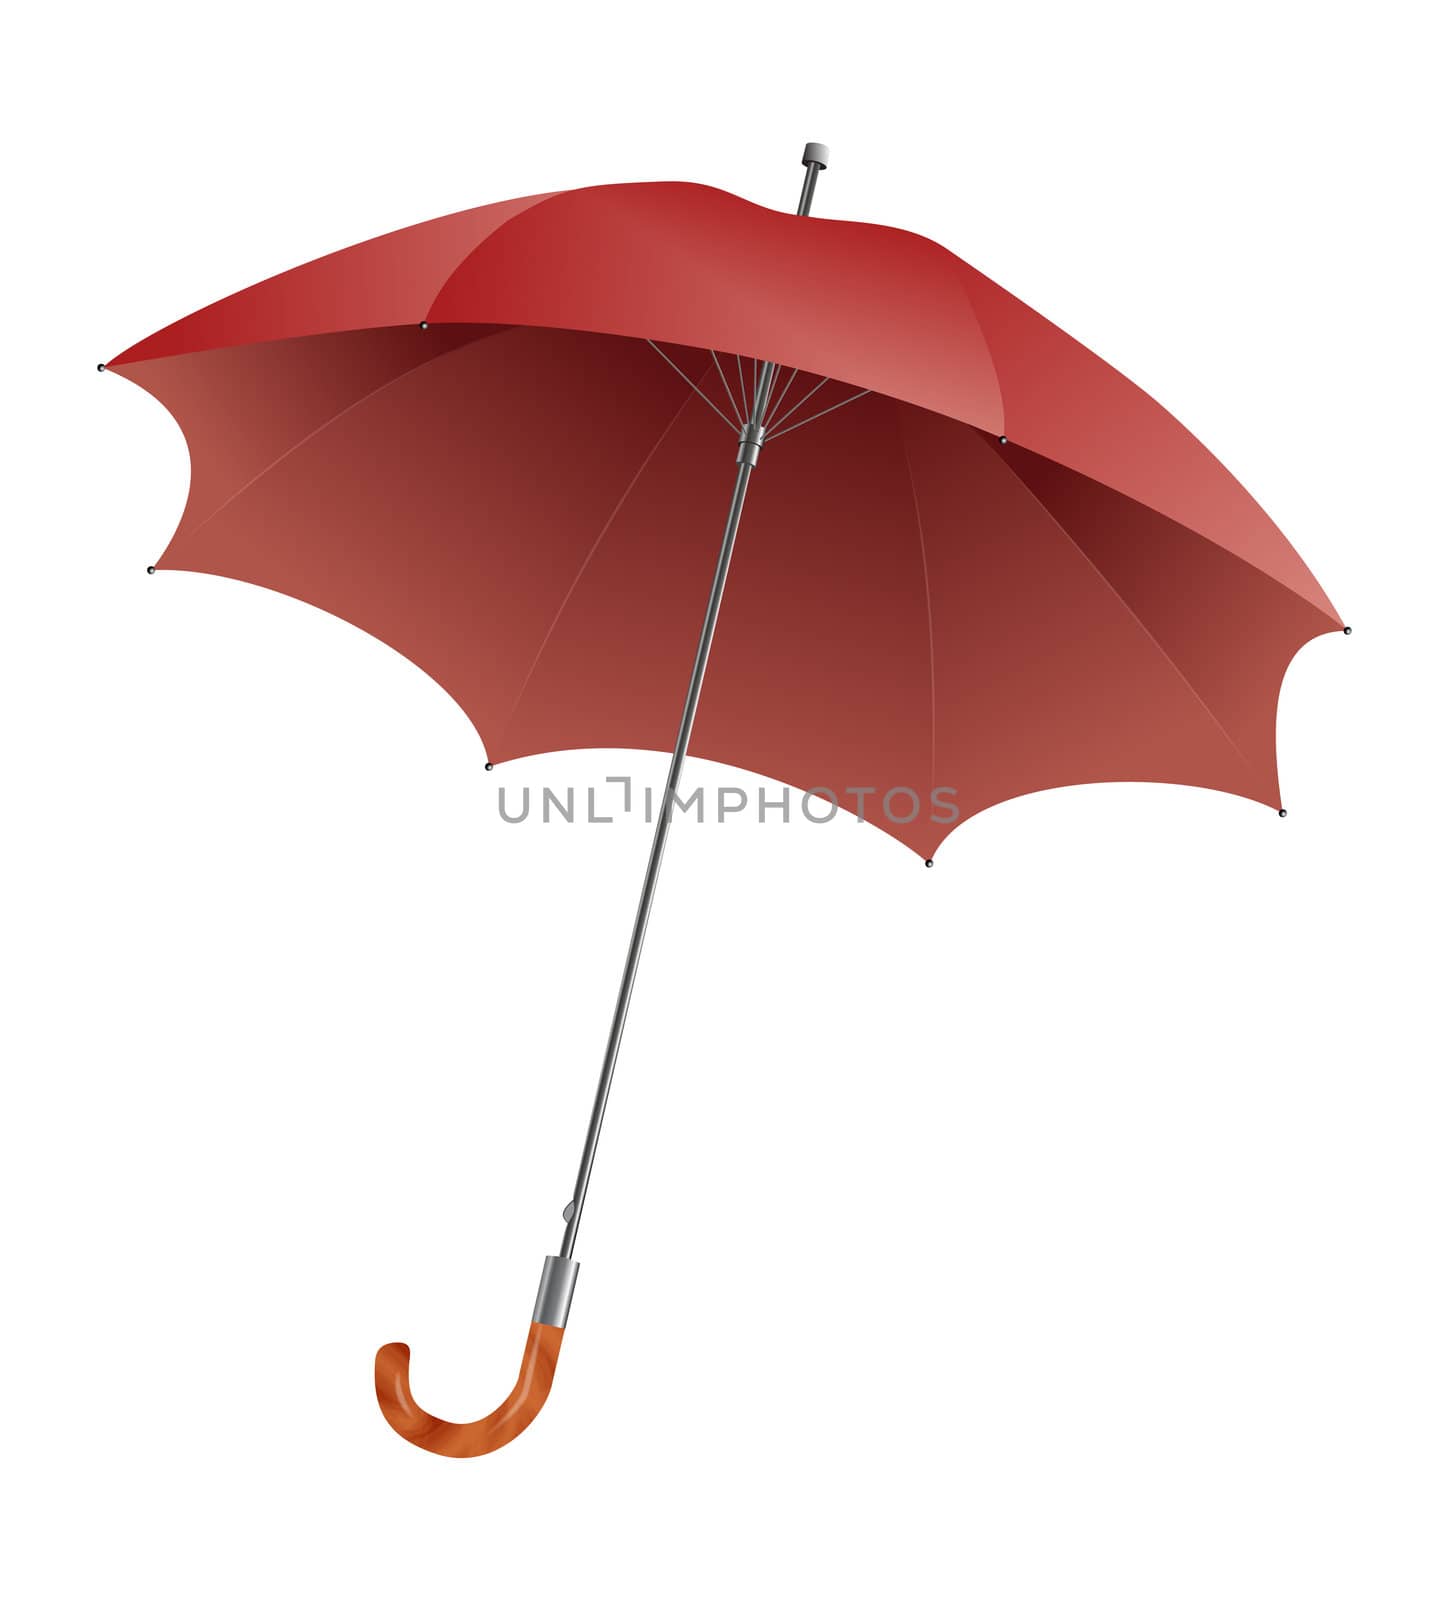 A red umbrella with wooden handle and metallic body